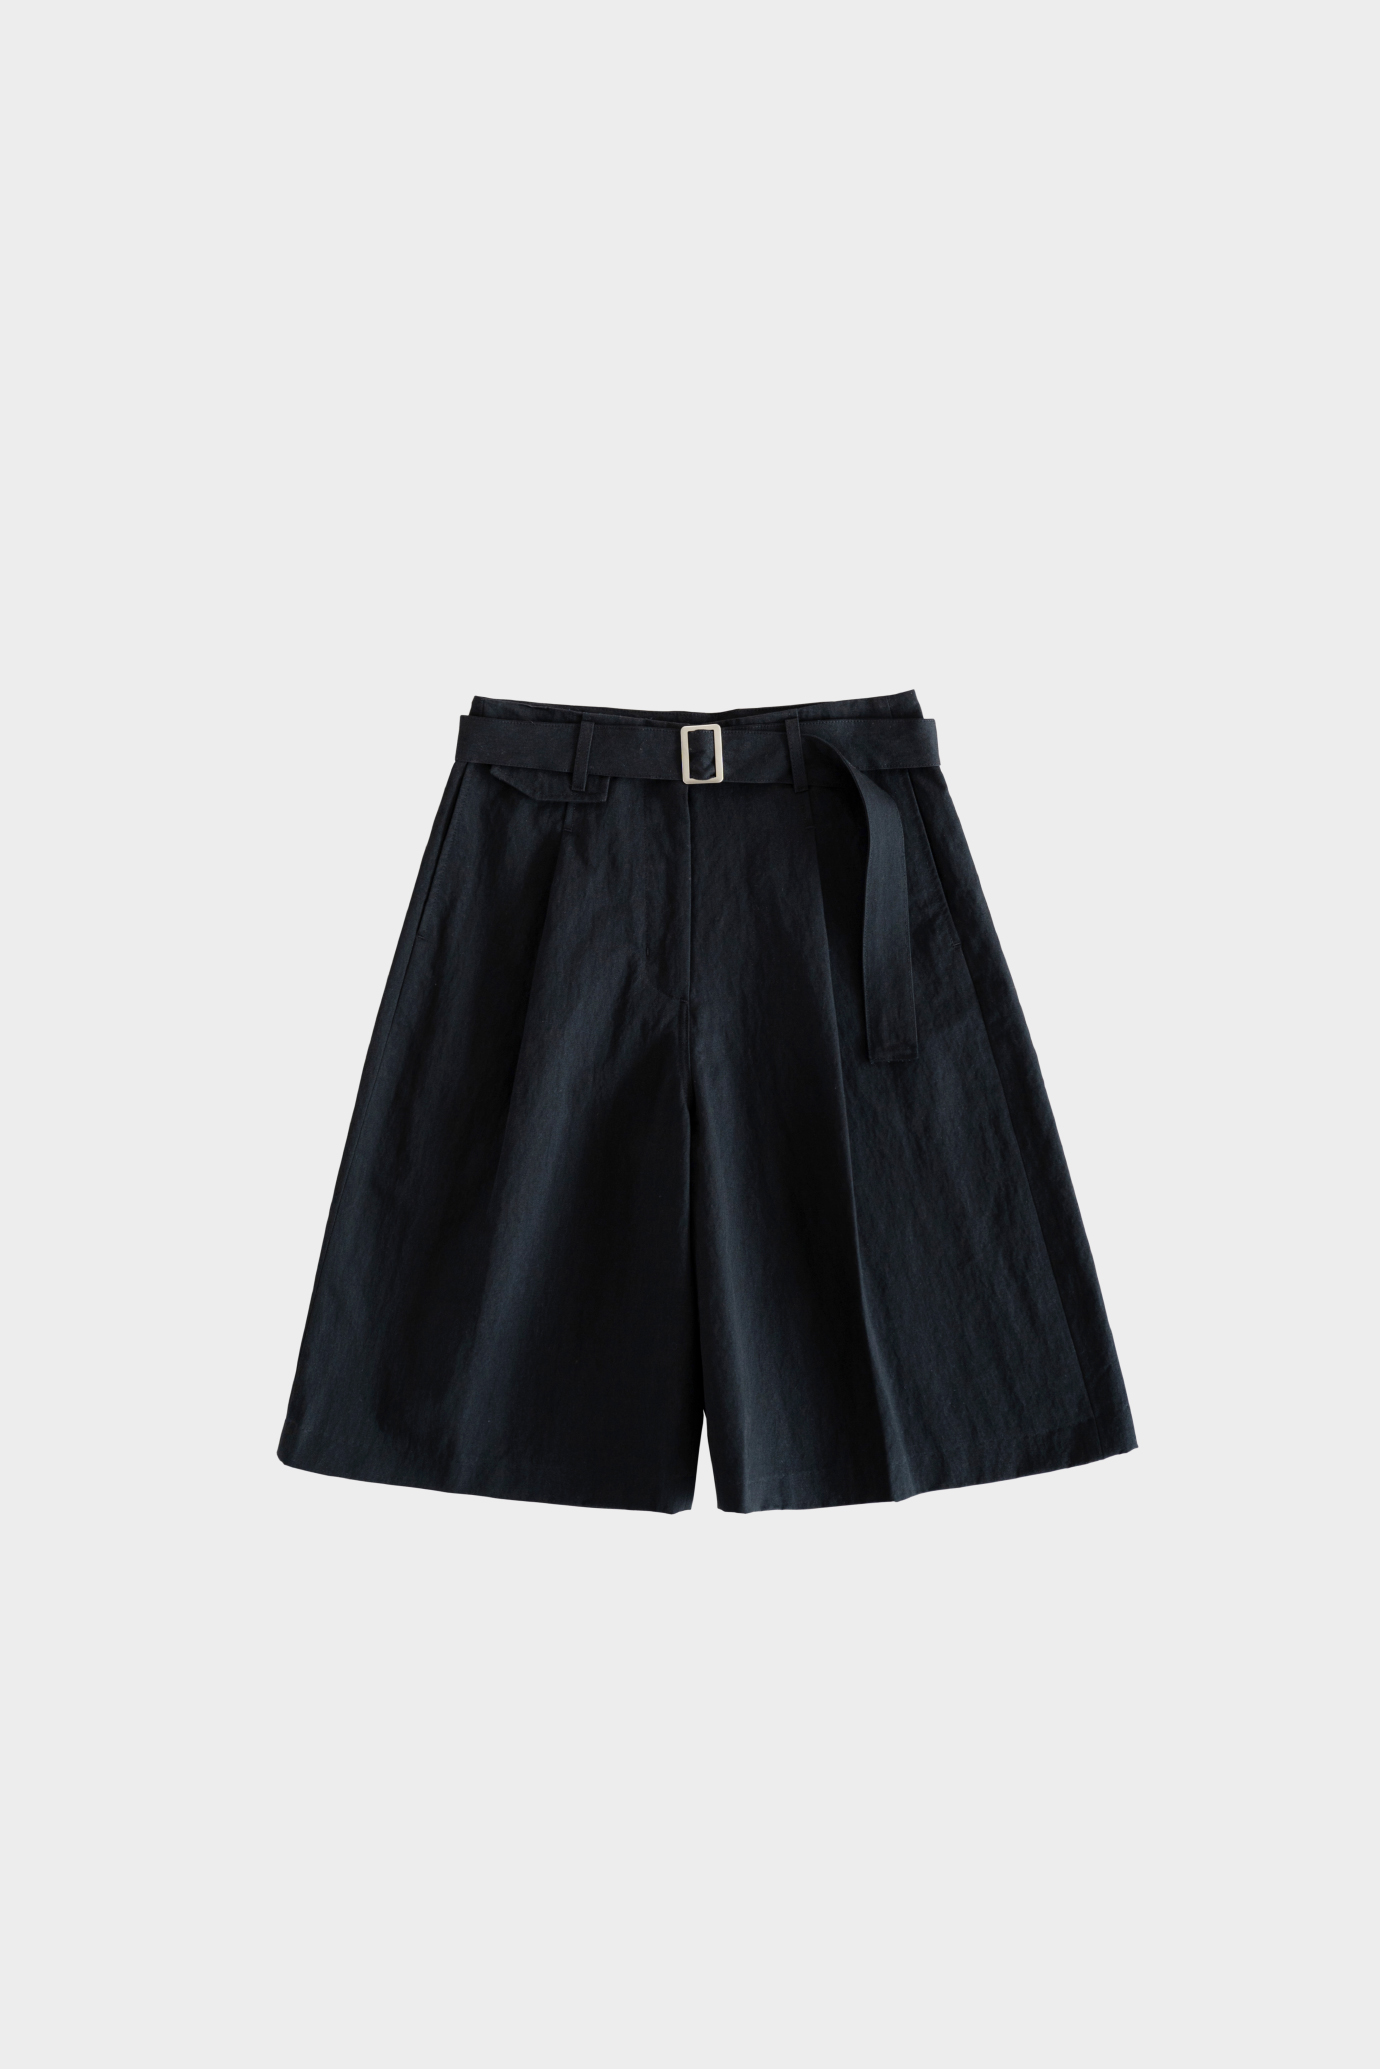 18069_Wide fit belted shorts [ New Season / 10% DC ] 5일 PM 5 마감